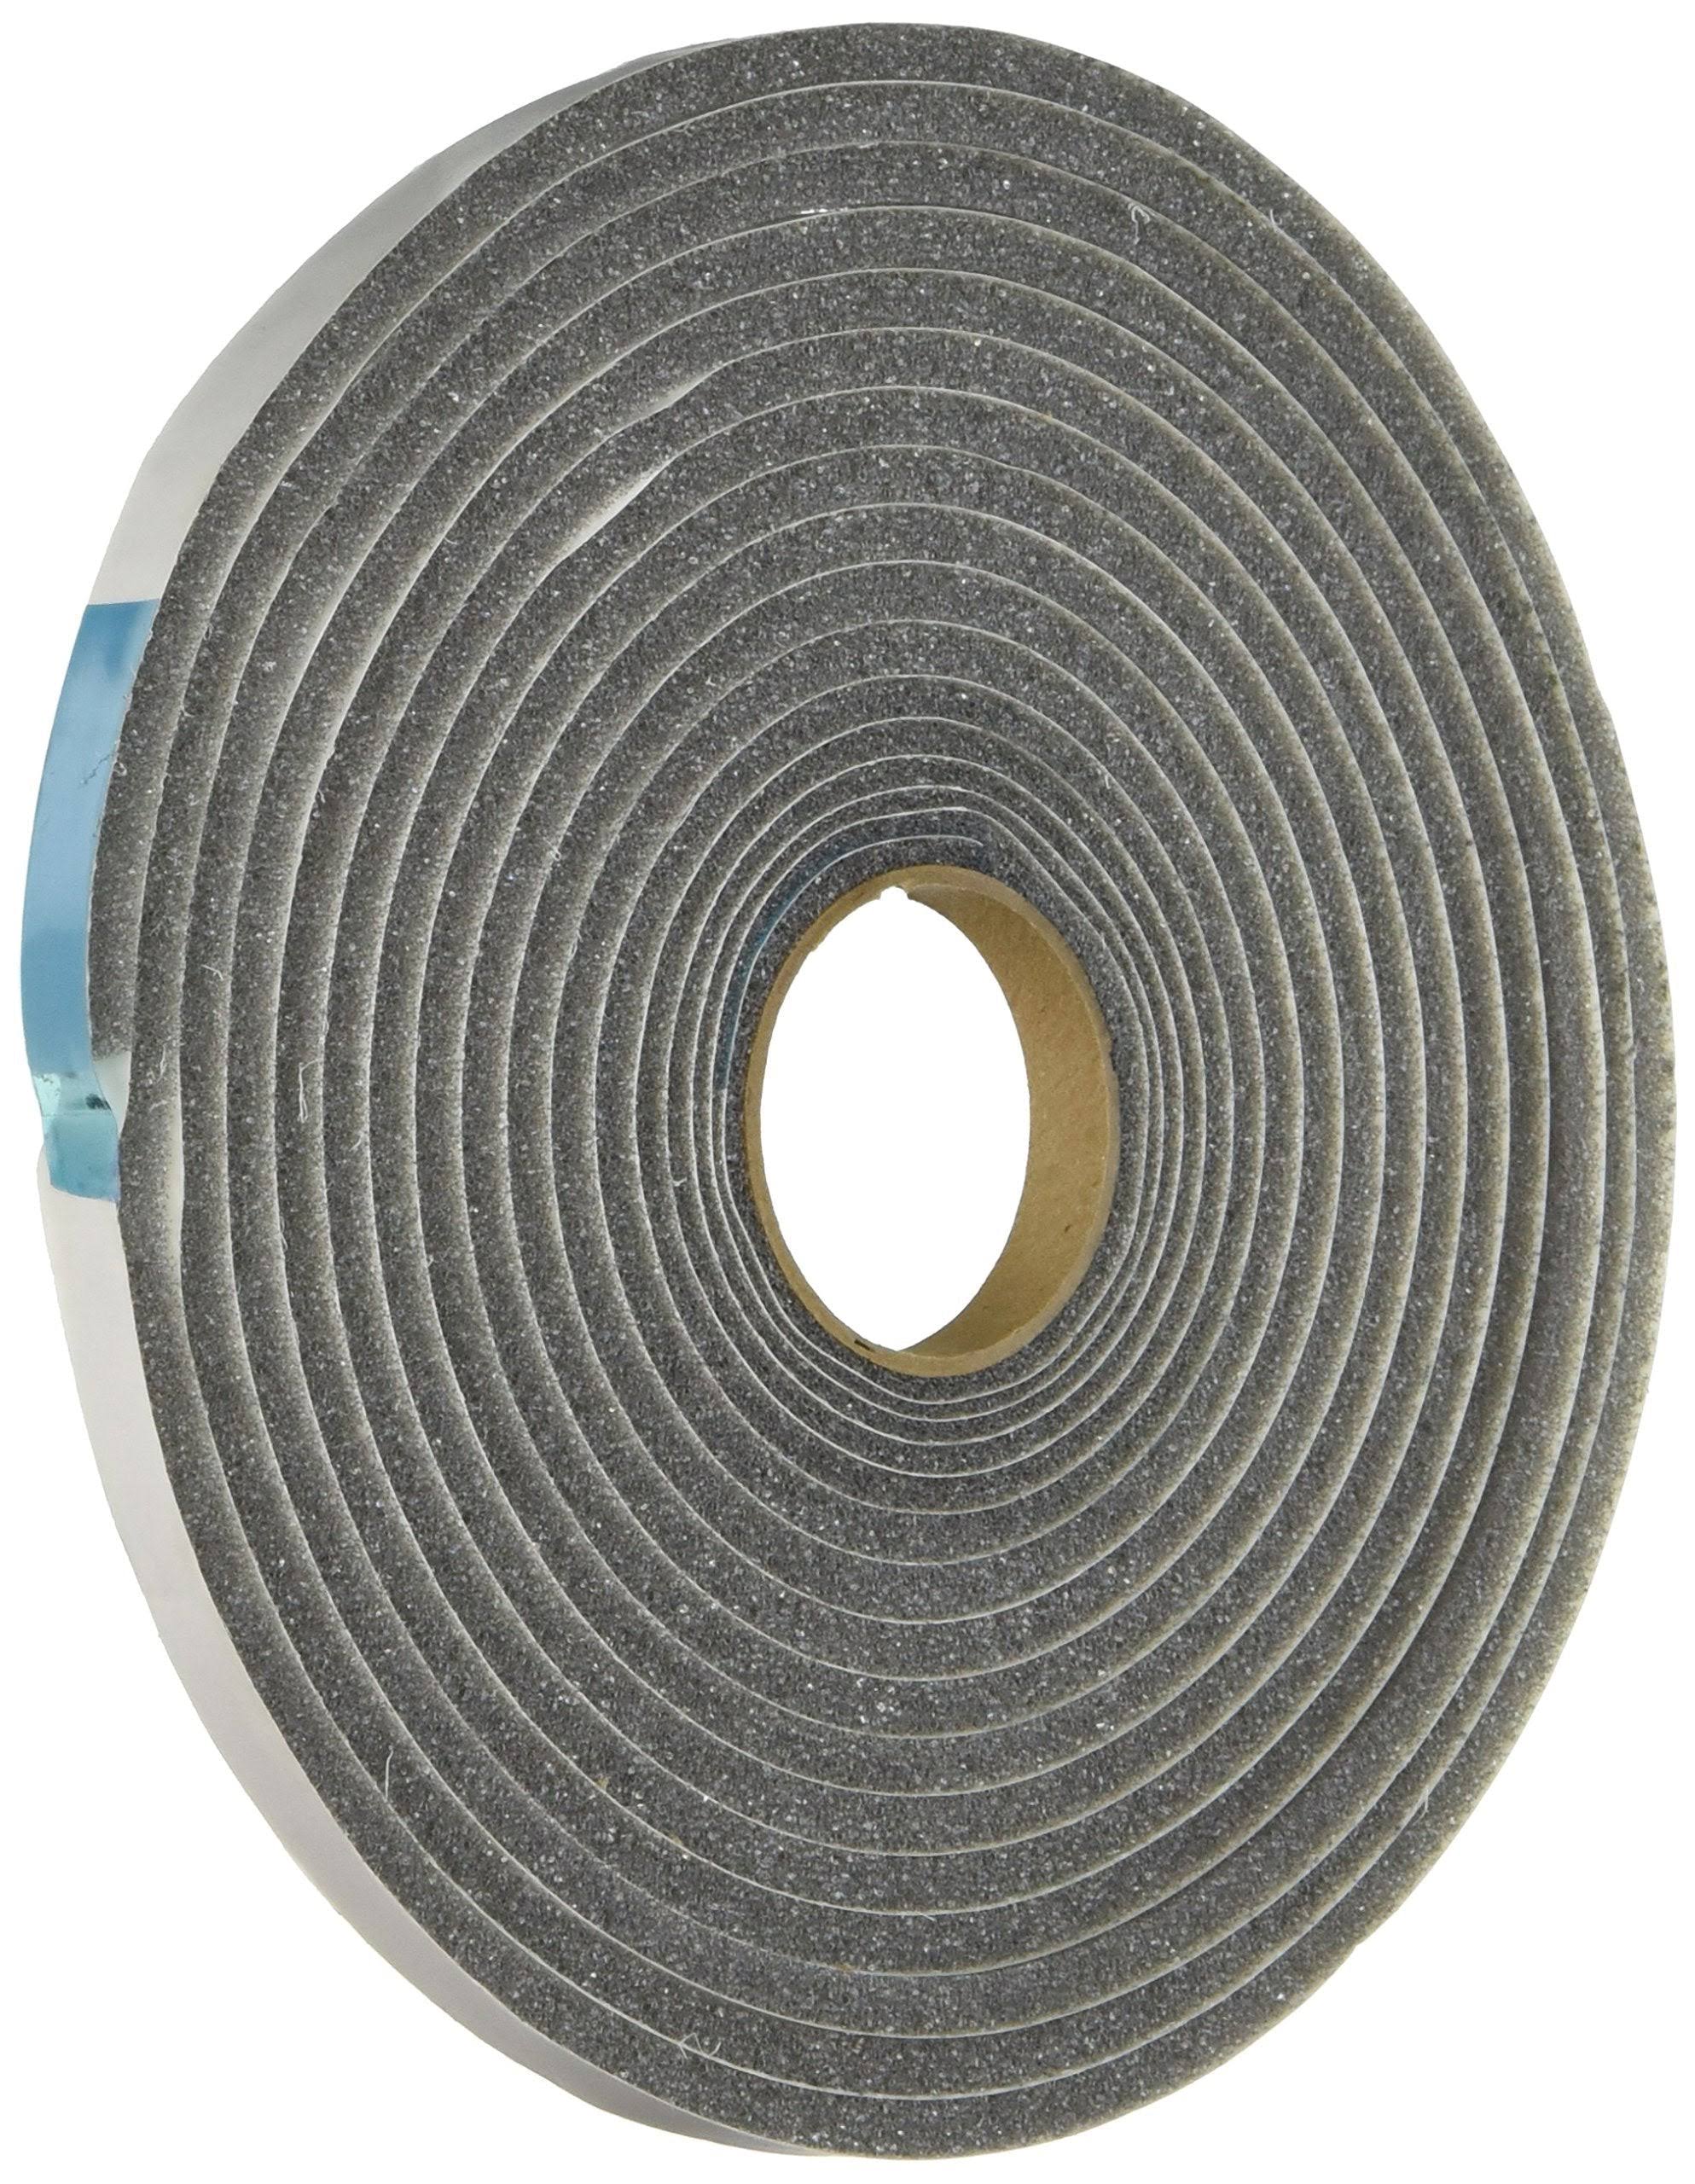 M-D 02055 Foam Tape, 17 ft L, 3/16 in Thick, Gray